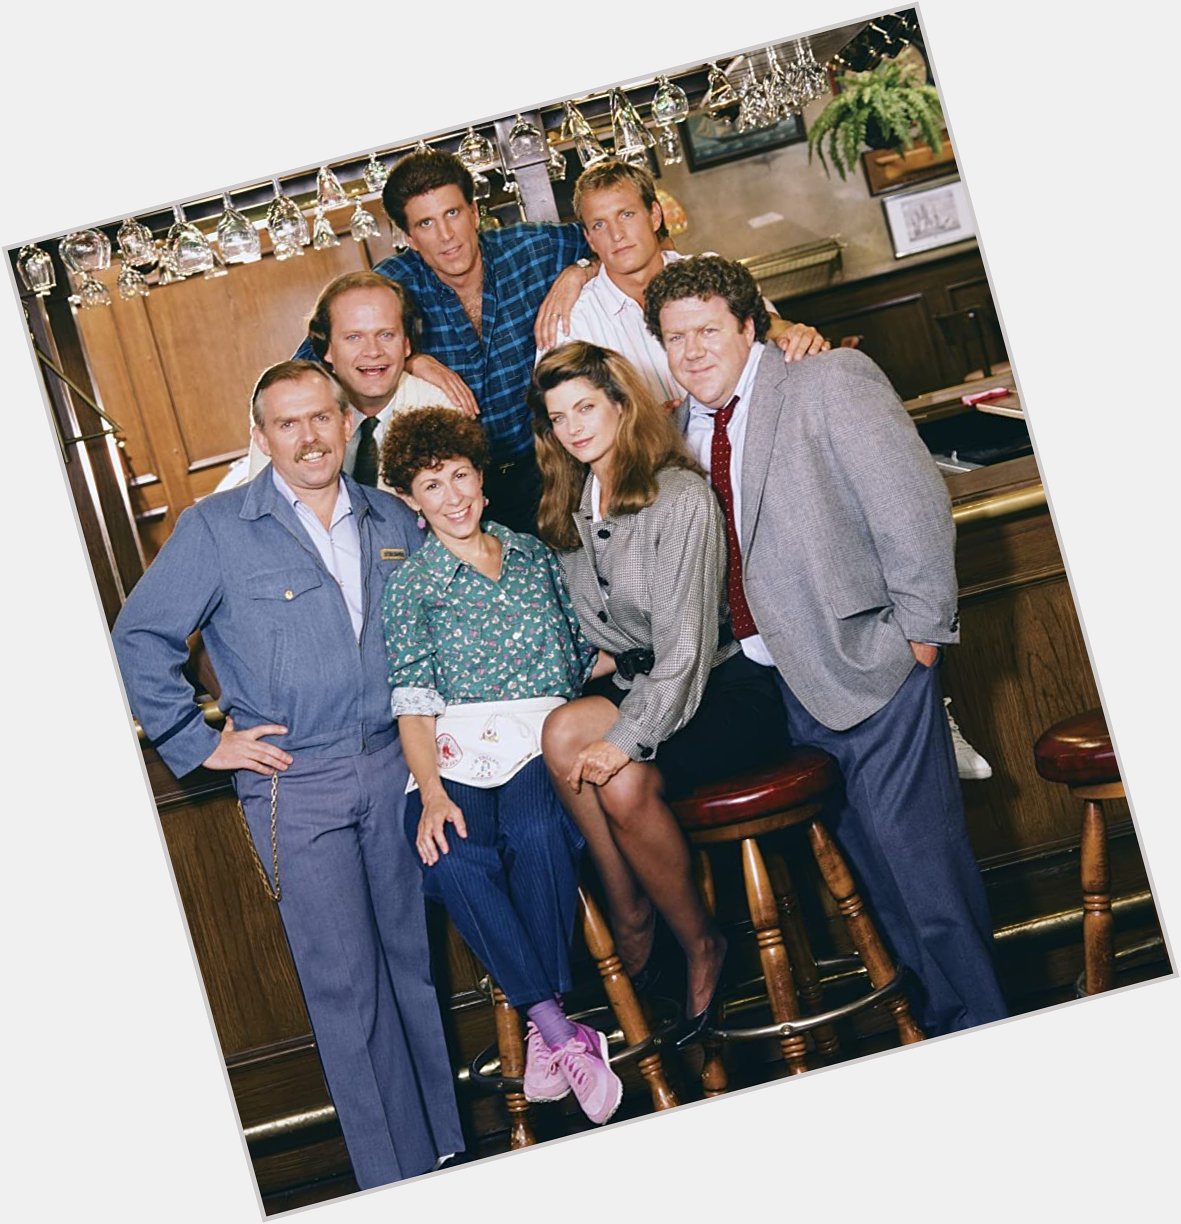 Happy birthday to John Ratzenberger, seen here with the cast of  